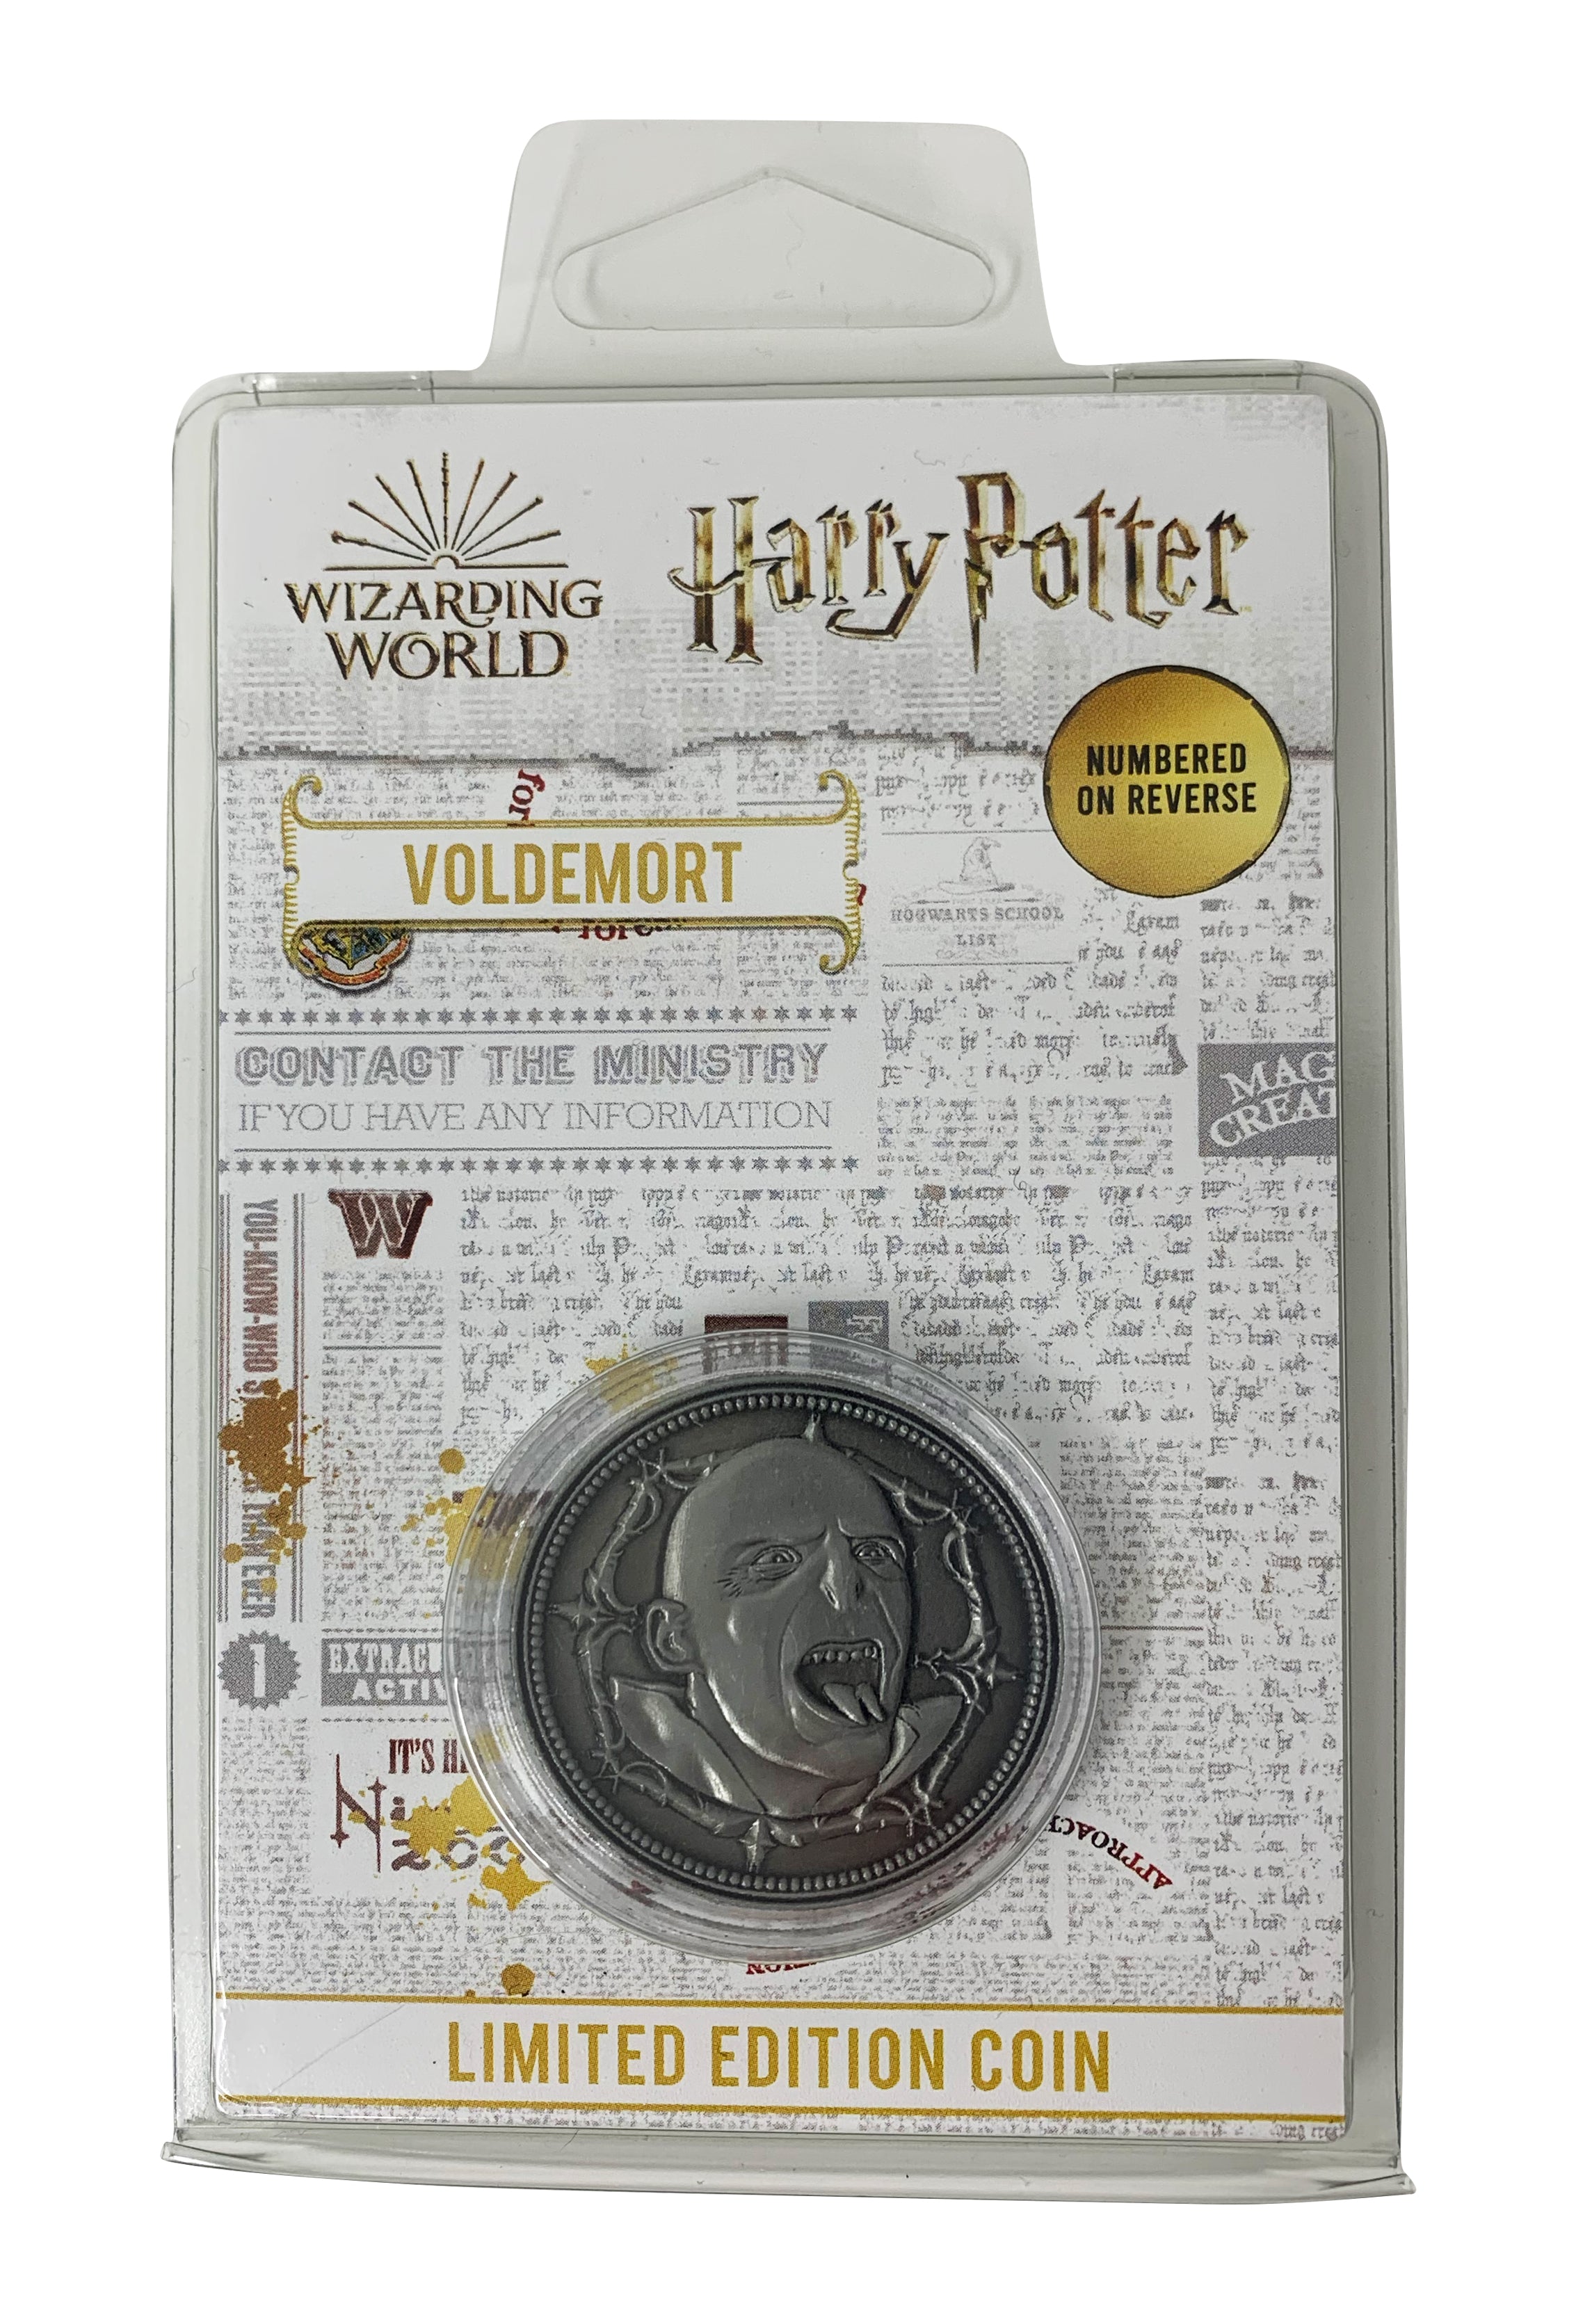 Harry Potter Limited Edition Coin - Voldemort